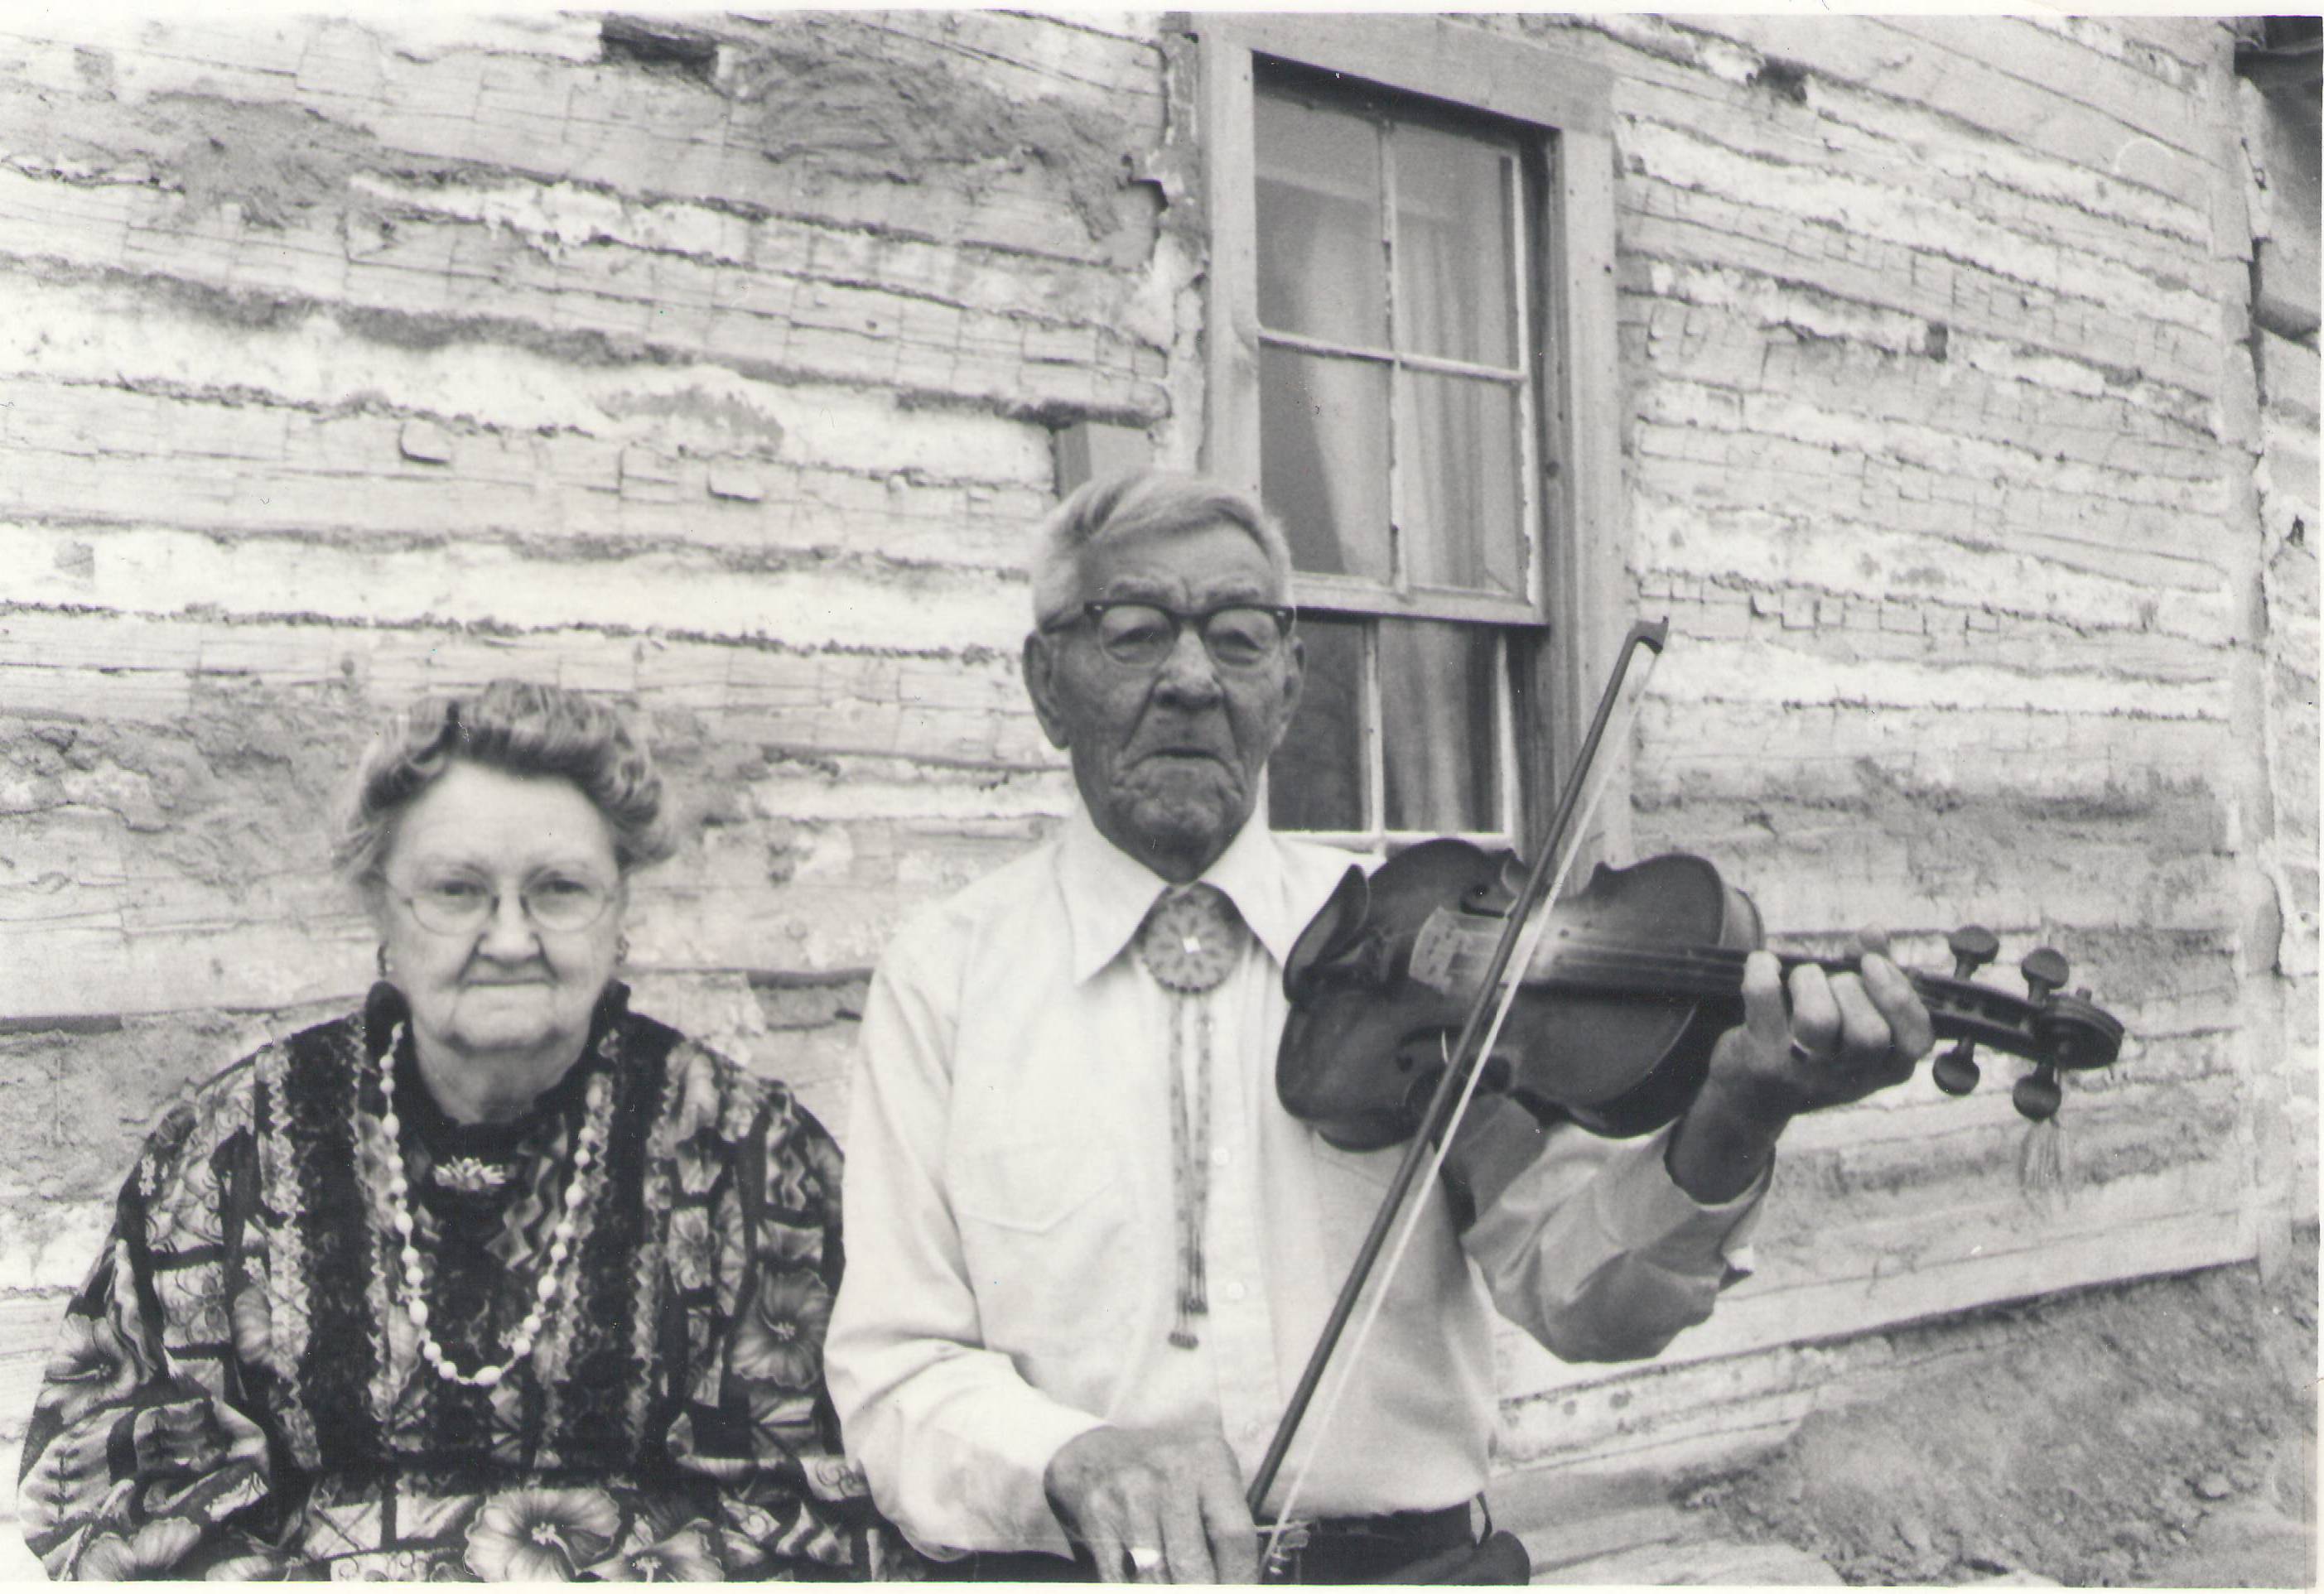 Thanks to quick responses we were able to determine that this couple is Narcisse and Elsie Lizotte!

990.4.79.135
Reid, Gordon